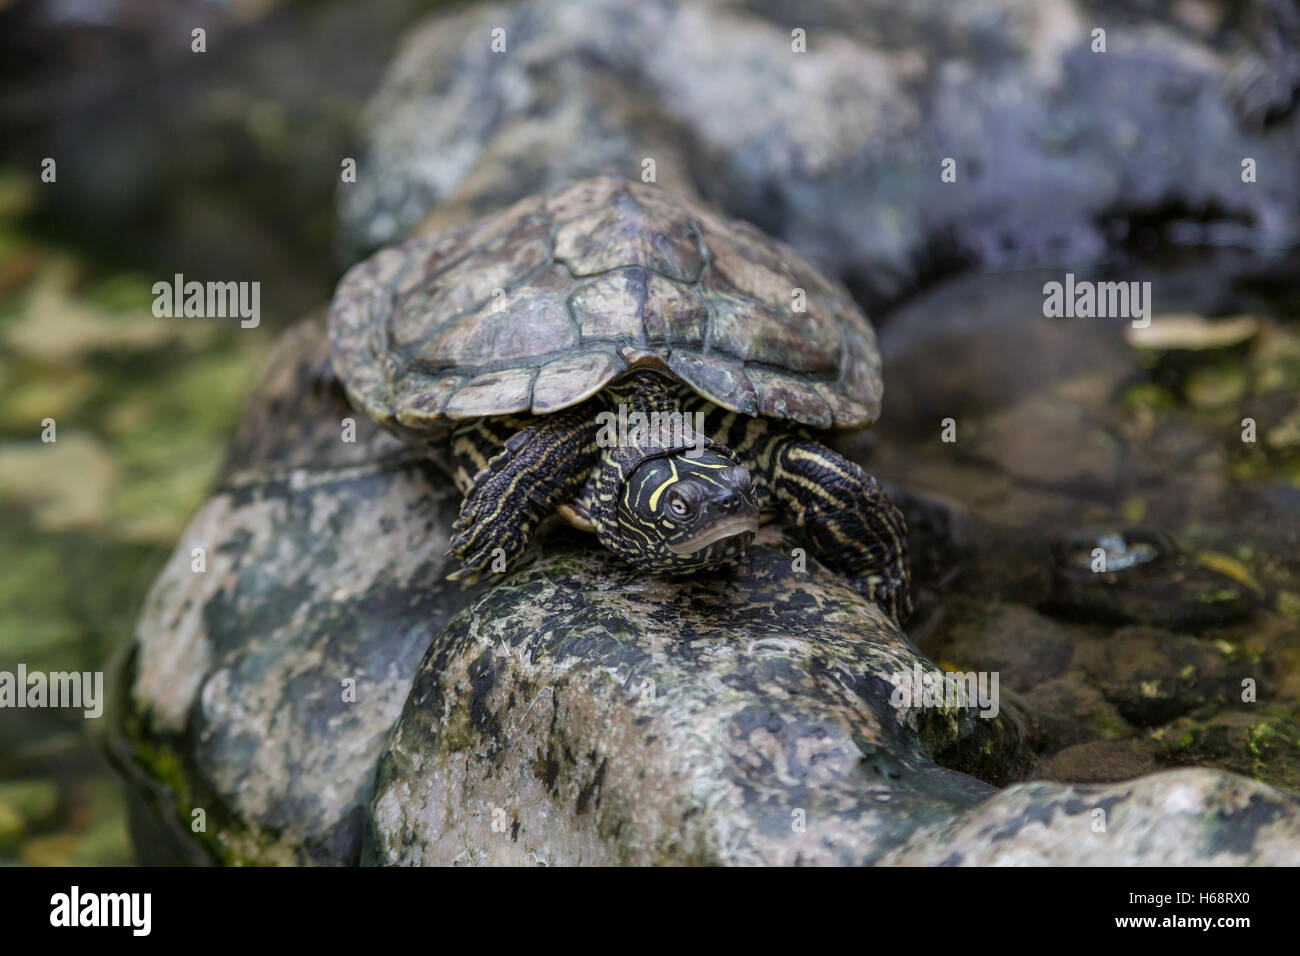 turtle with damaged carapace on stone in terrerium Stock Photo